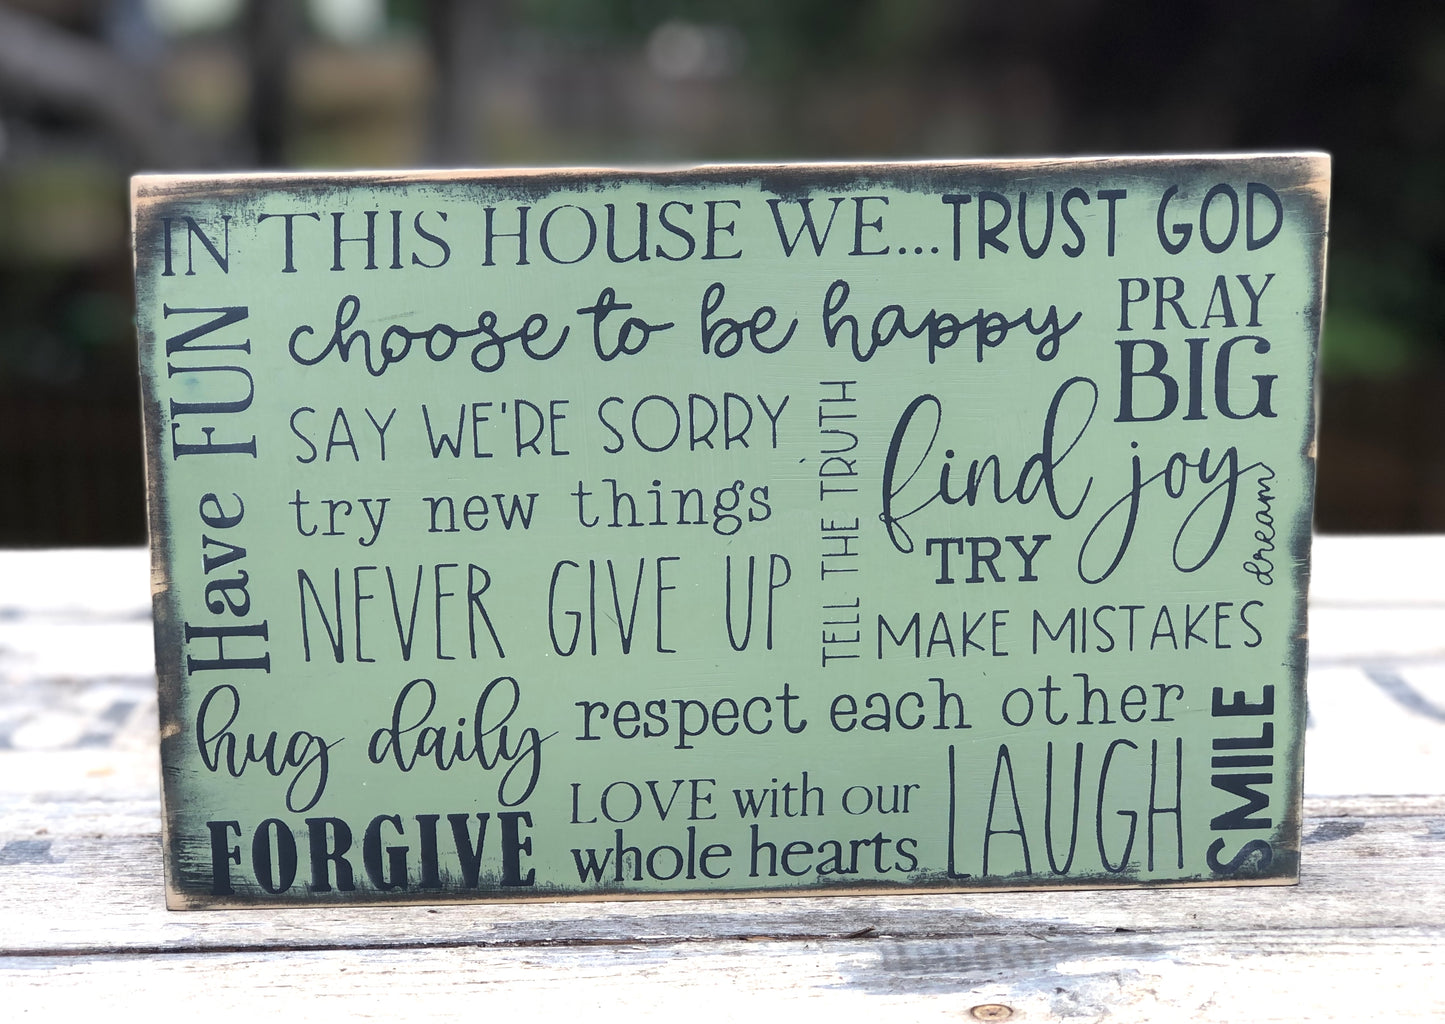 IN THIS HOUSE TRUST GOD, CHOOSE TO BE HAPPY, PRAY BIG, HAVE FUN, TELL THE TRUTH, SMILE - WOOD SIGN